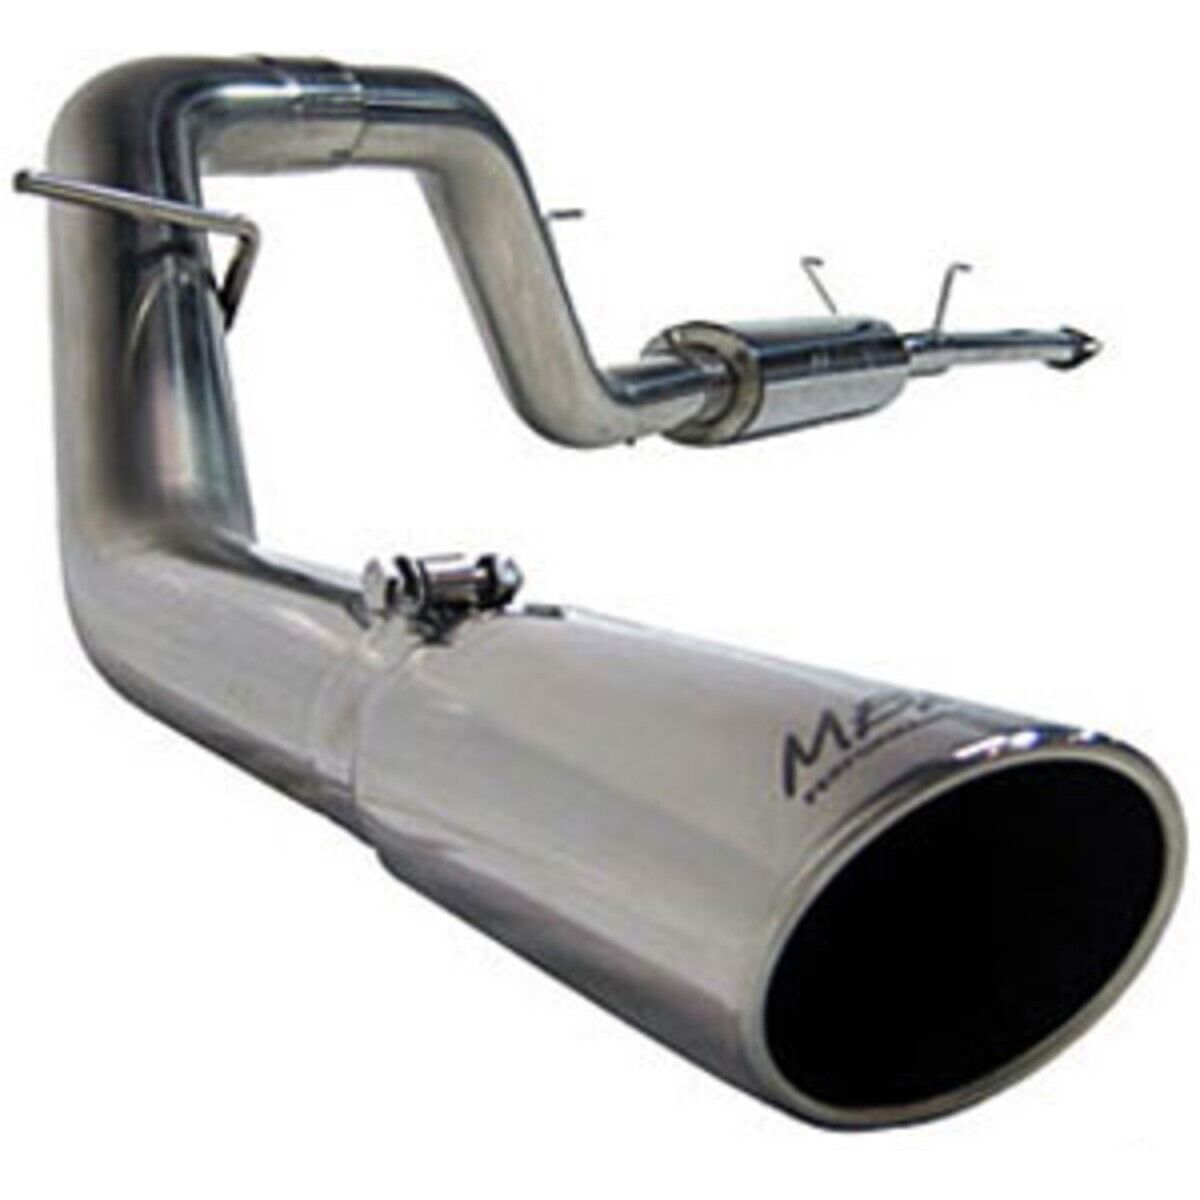 S5024AL MBRP Exhaust System for Chevy Avalanche Suburban Yukon Chevrolet 1500 XL